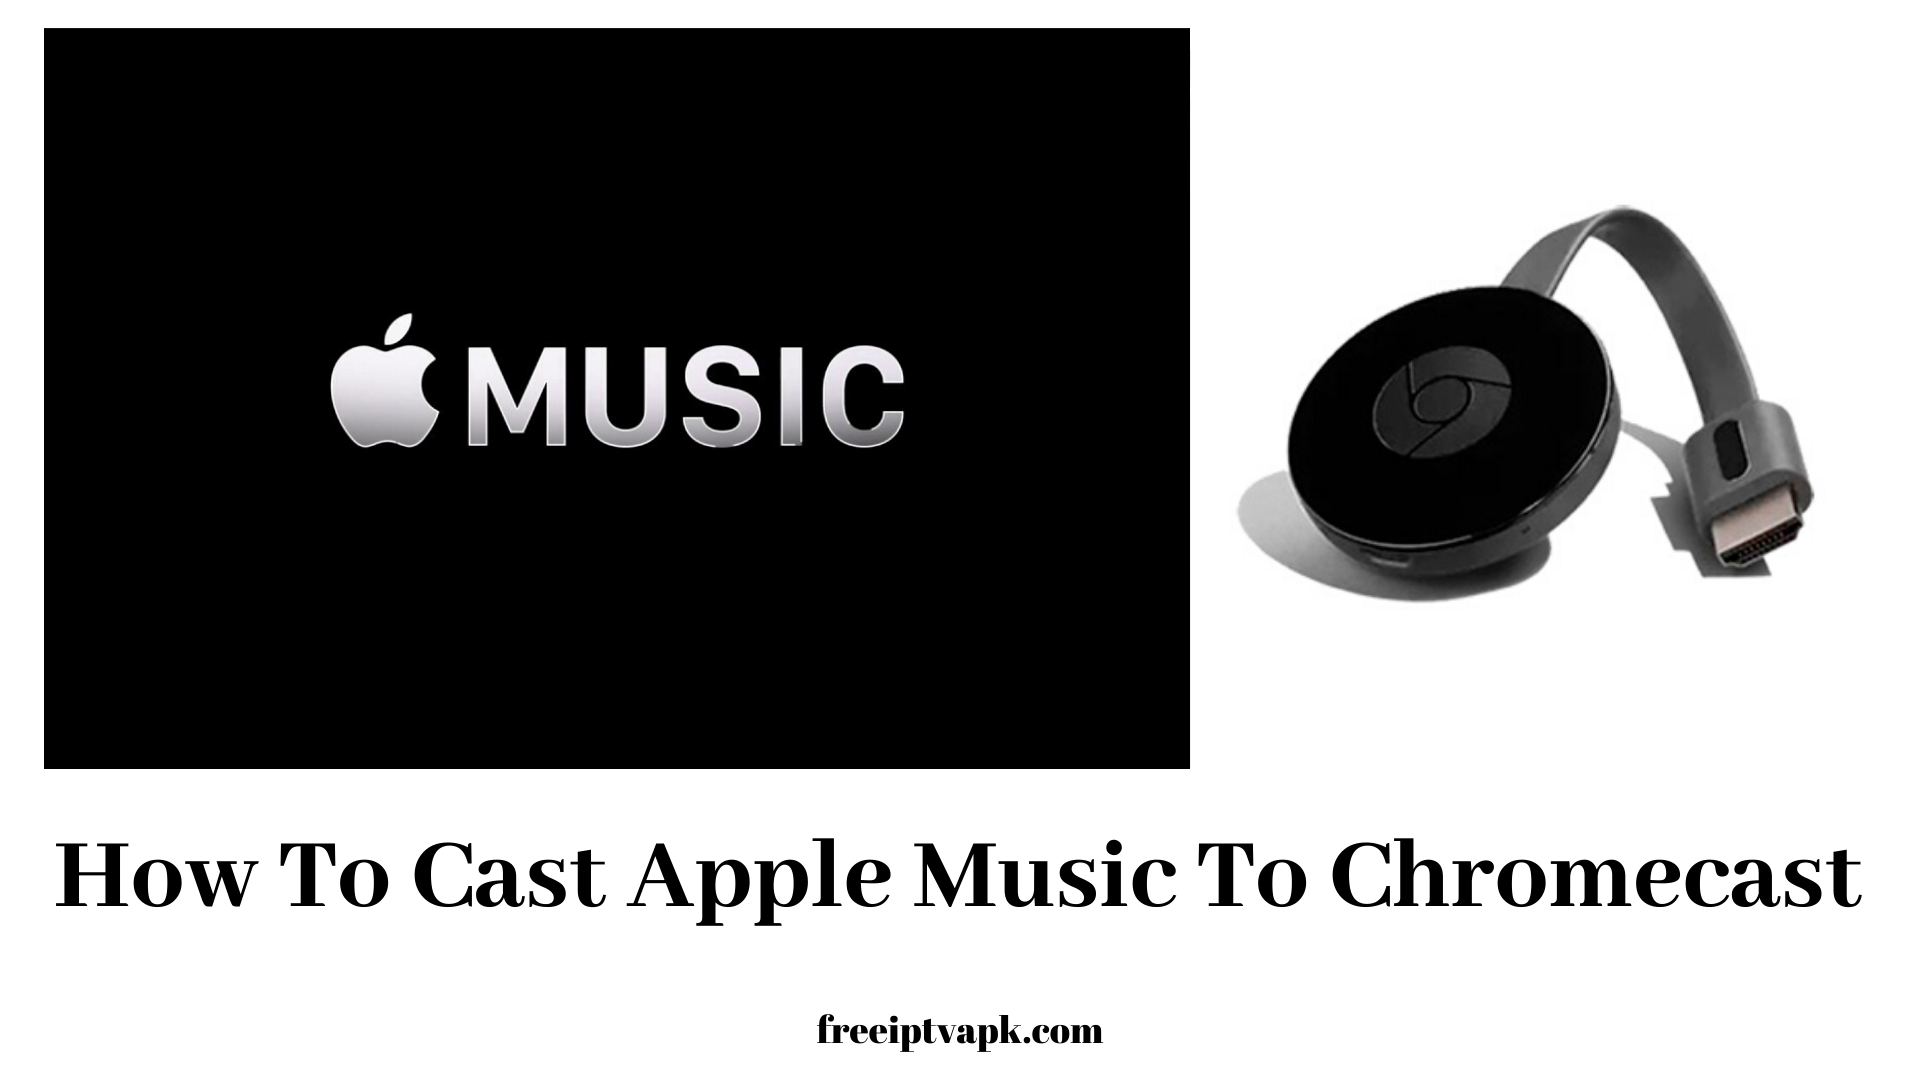 How to Chromecast Apple Music on your TV [2019]